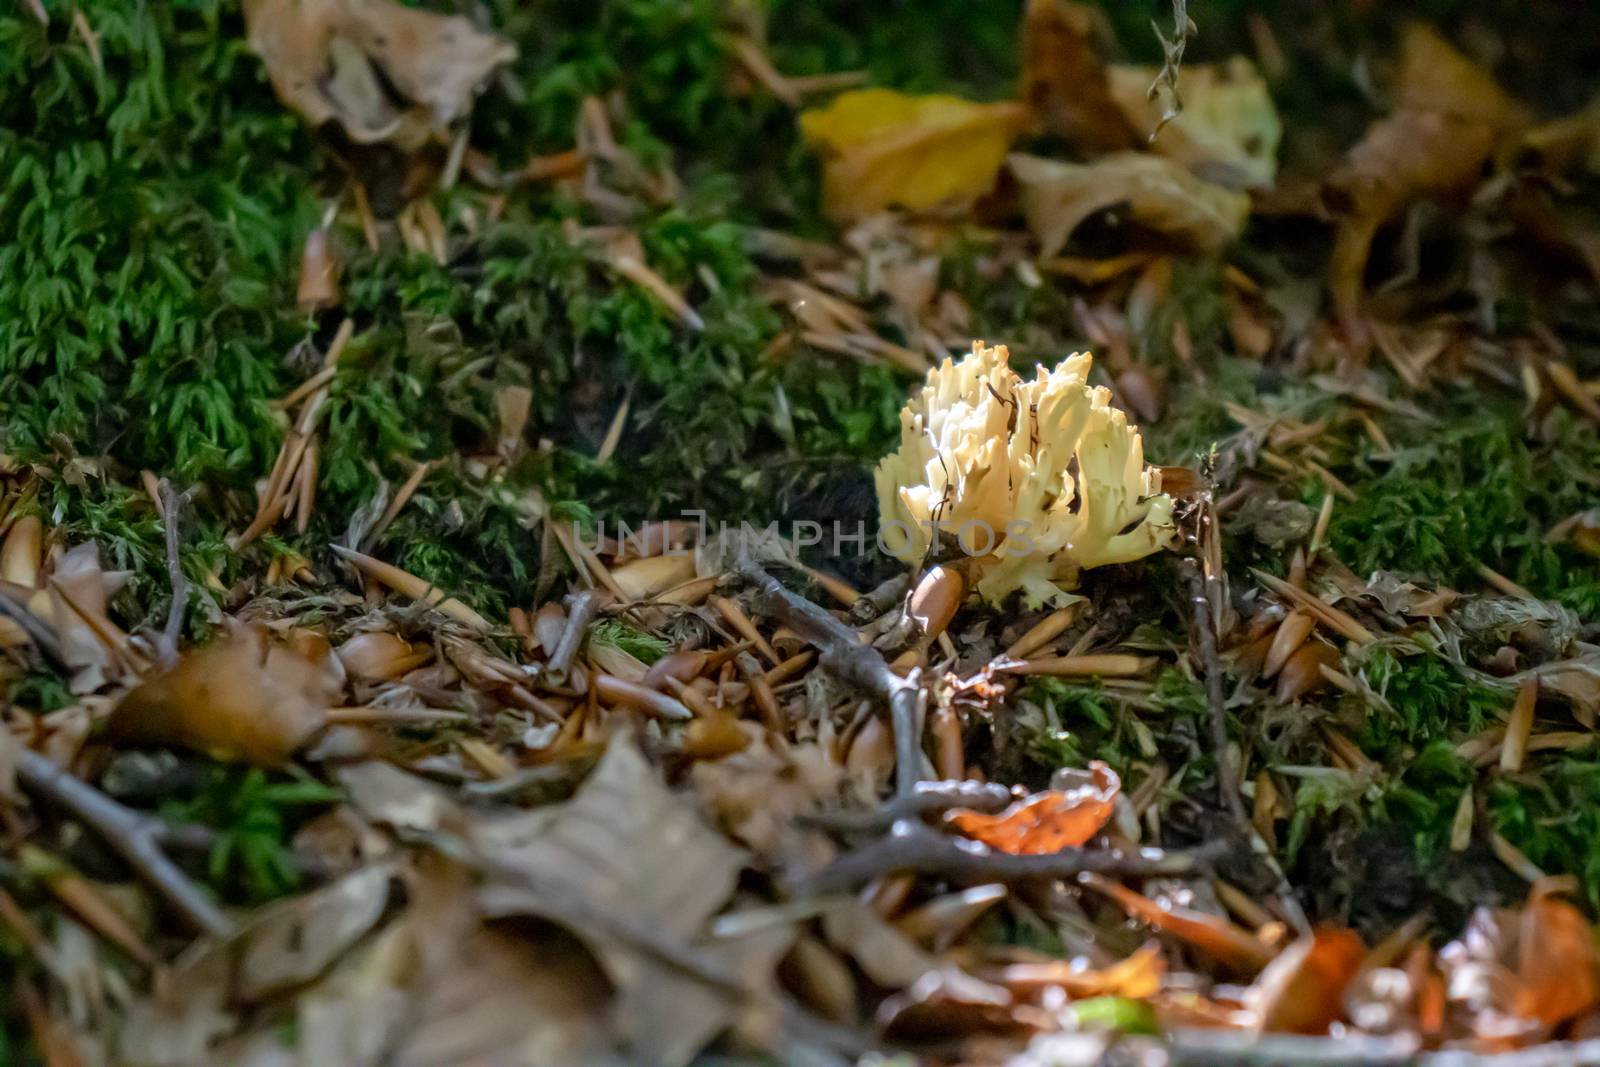 Ramaria pallida white mushroom in the forest coming out of the moss green background by Andreajk3